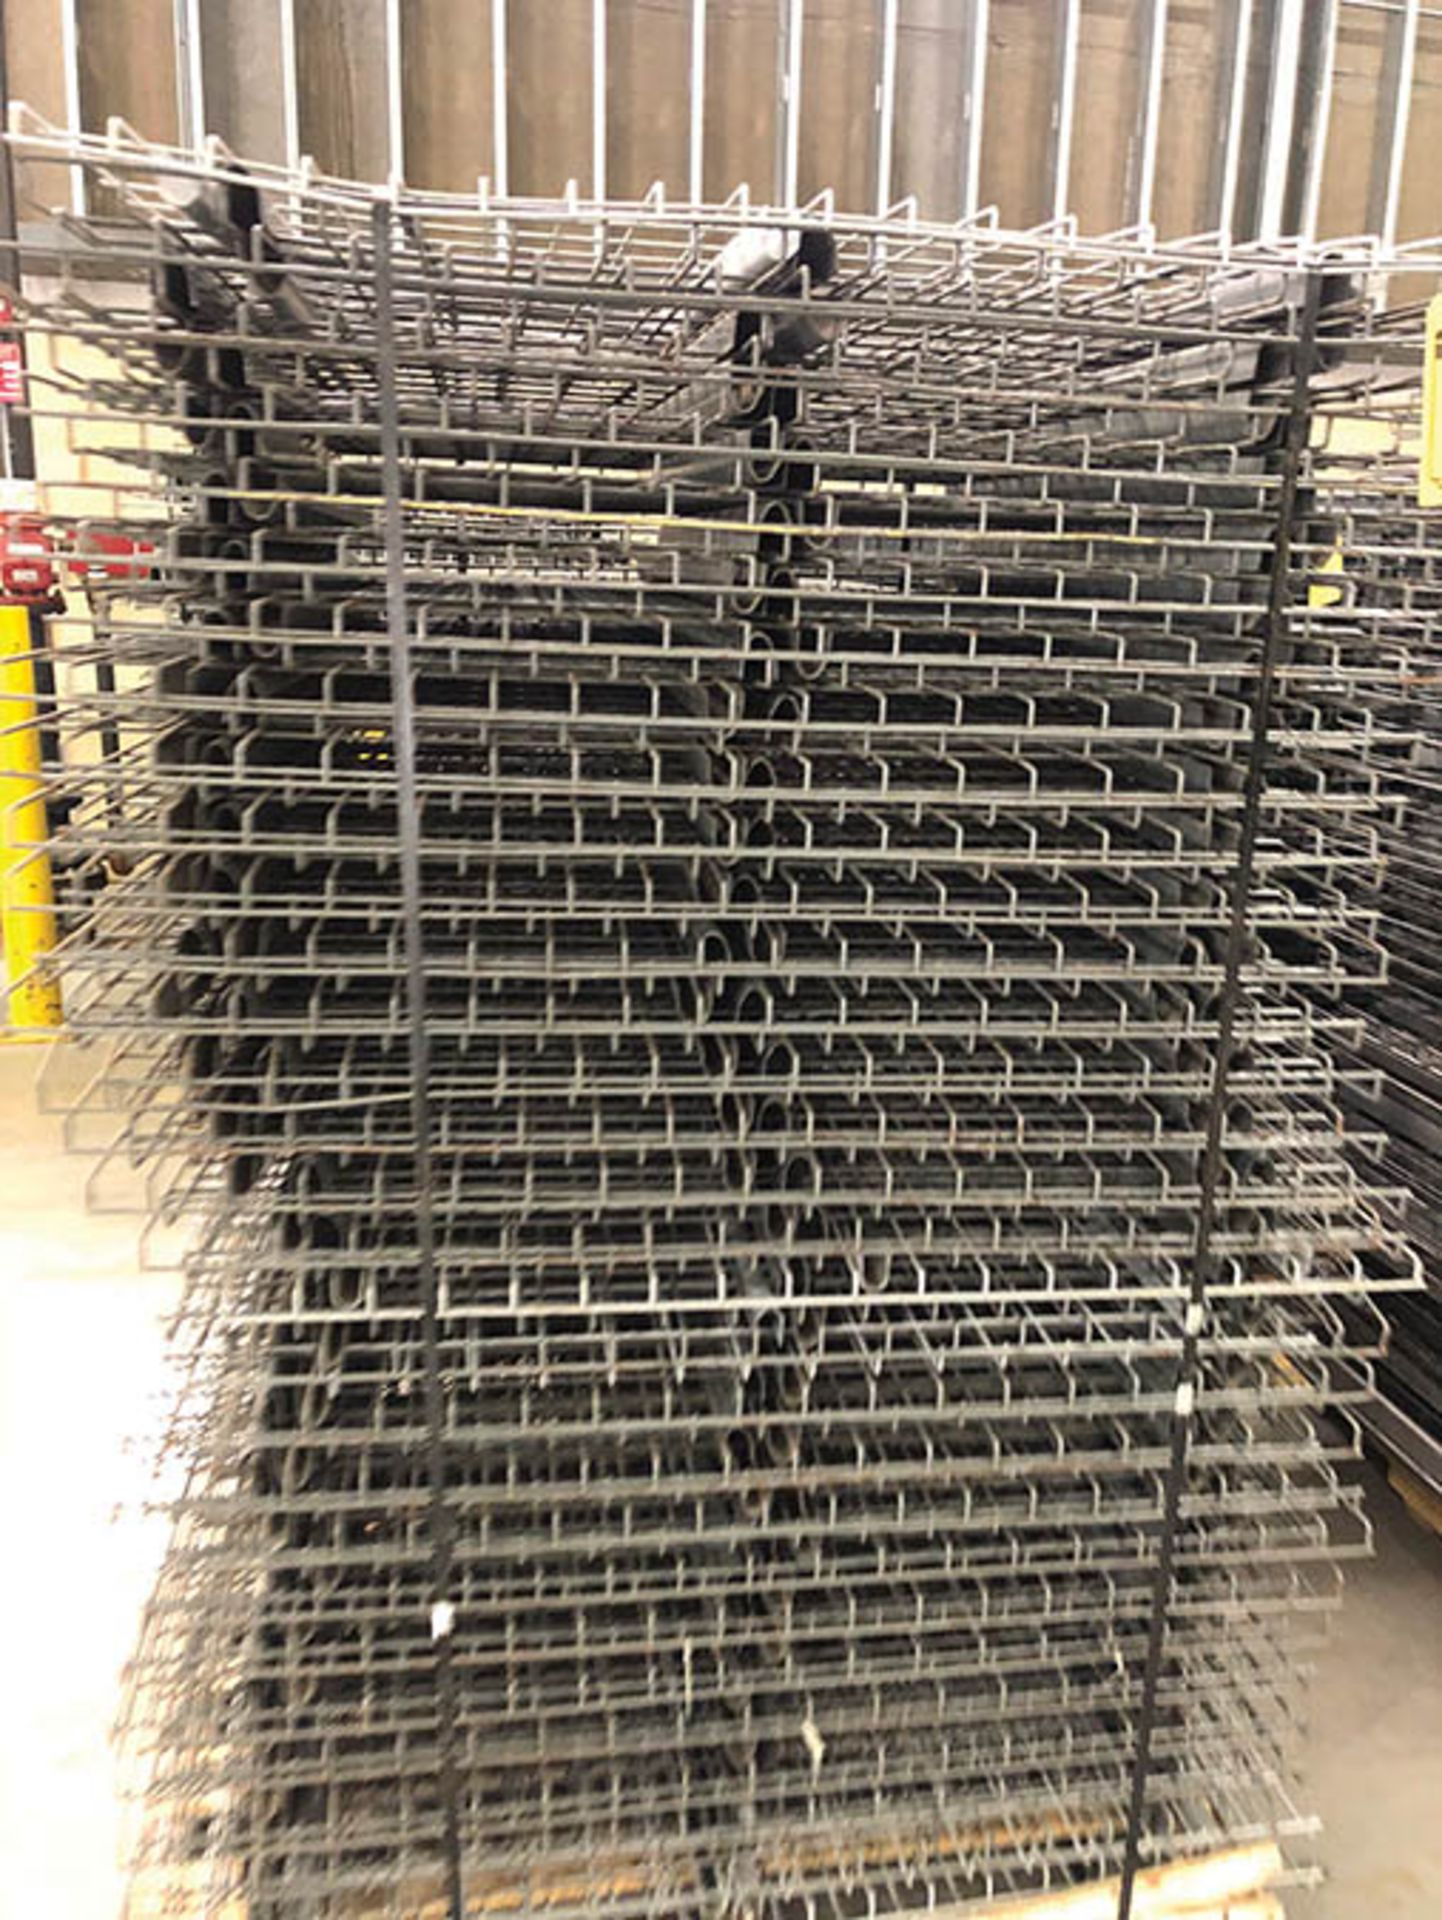 (X218) SECTIONS OF WIRE DECKING 45'` X 44'' X 1'` DEEP